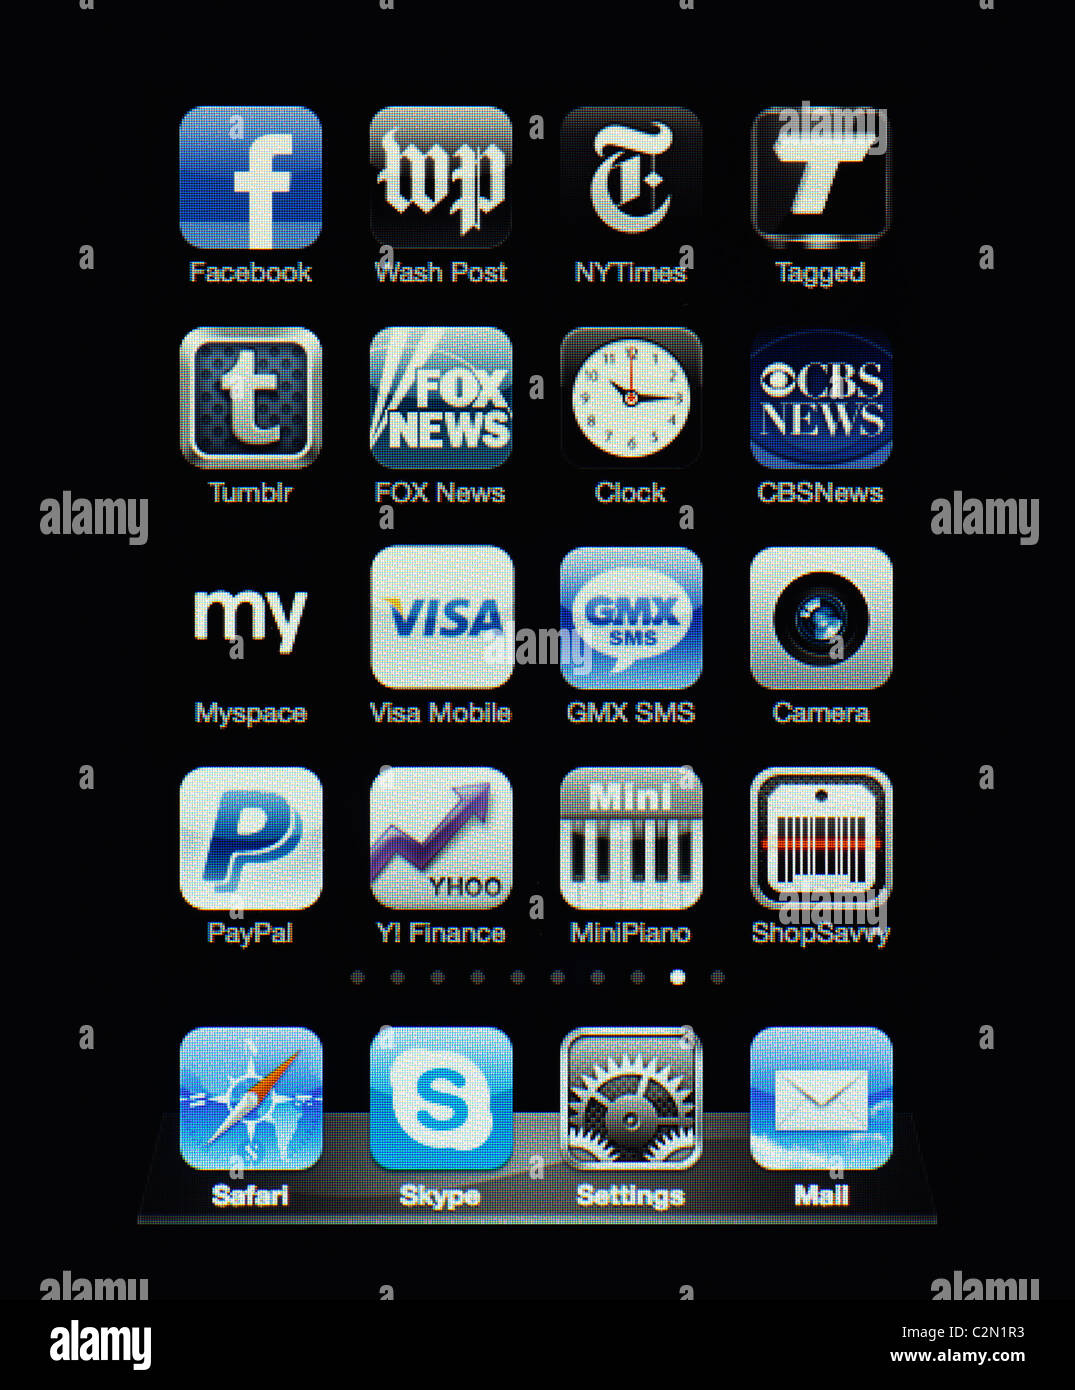 Image of the iphone touch screen. Display shows a collection of useful apps with blue and grey color scheme. Stock Photo